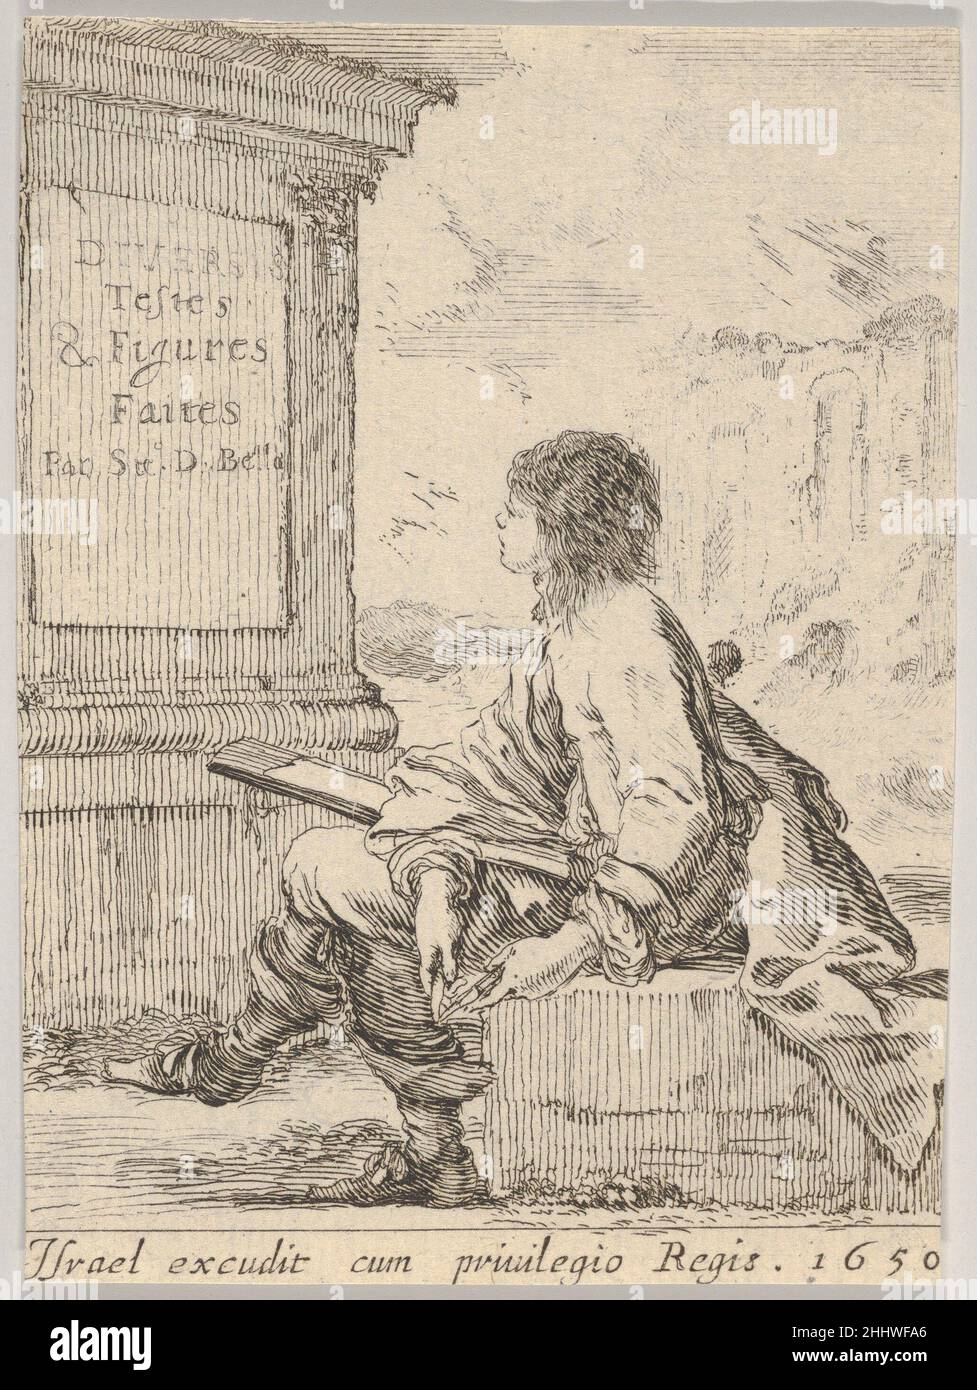 Plate 1: a young man sitting on a stone, facing left in profile, holding a drawing pad in his lap and a pen in his left hand, a pedestal with title to left and ruins to right in the background, title page from 'Various heads and figures' (Diverses têtes et figures) 1650 Stefano della Bella Italian. Plate 1: a young man sitting on a stone, facing left in profile, holding a drawing pad in his lap and a pen in his left hand, a pedestal with title to left and ruins to right in the background, title page from 'Various heads and figures' (Diverses têtes et figures)  412246 Stock Photo